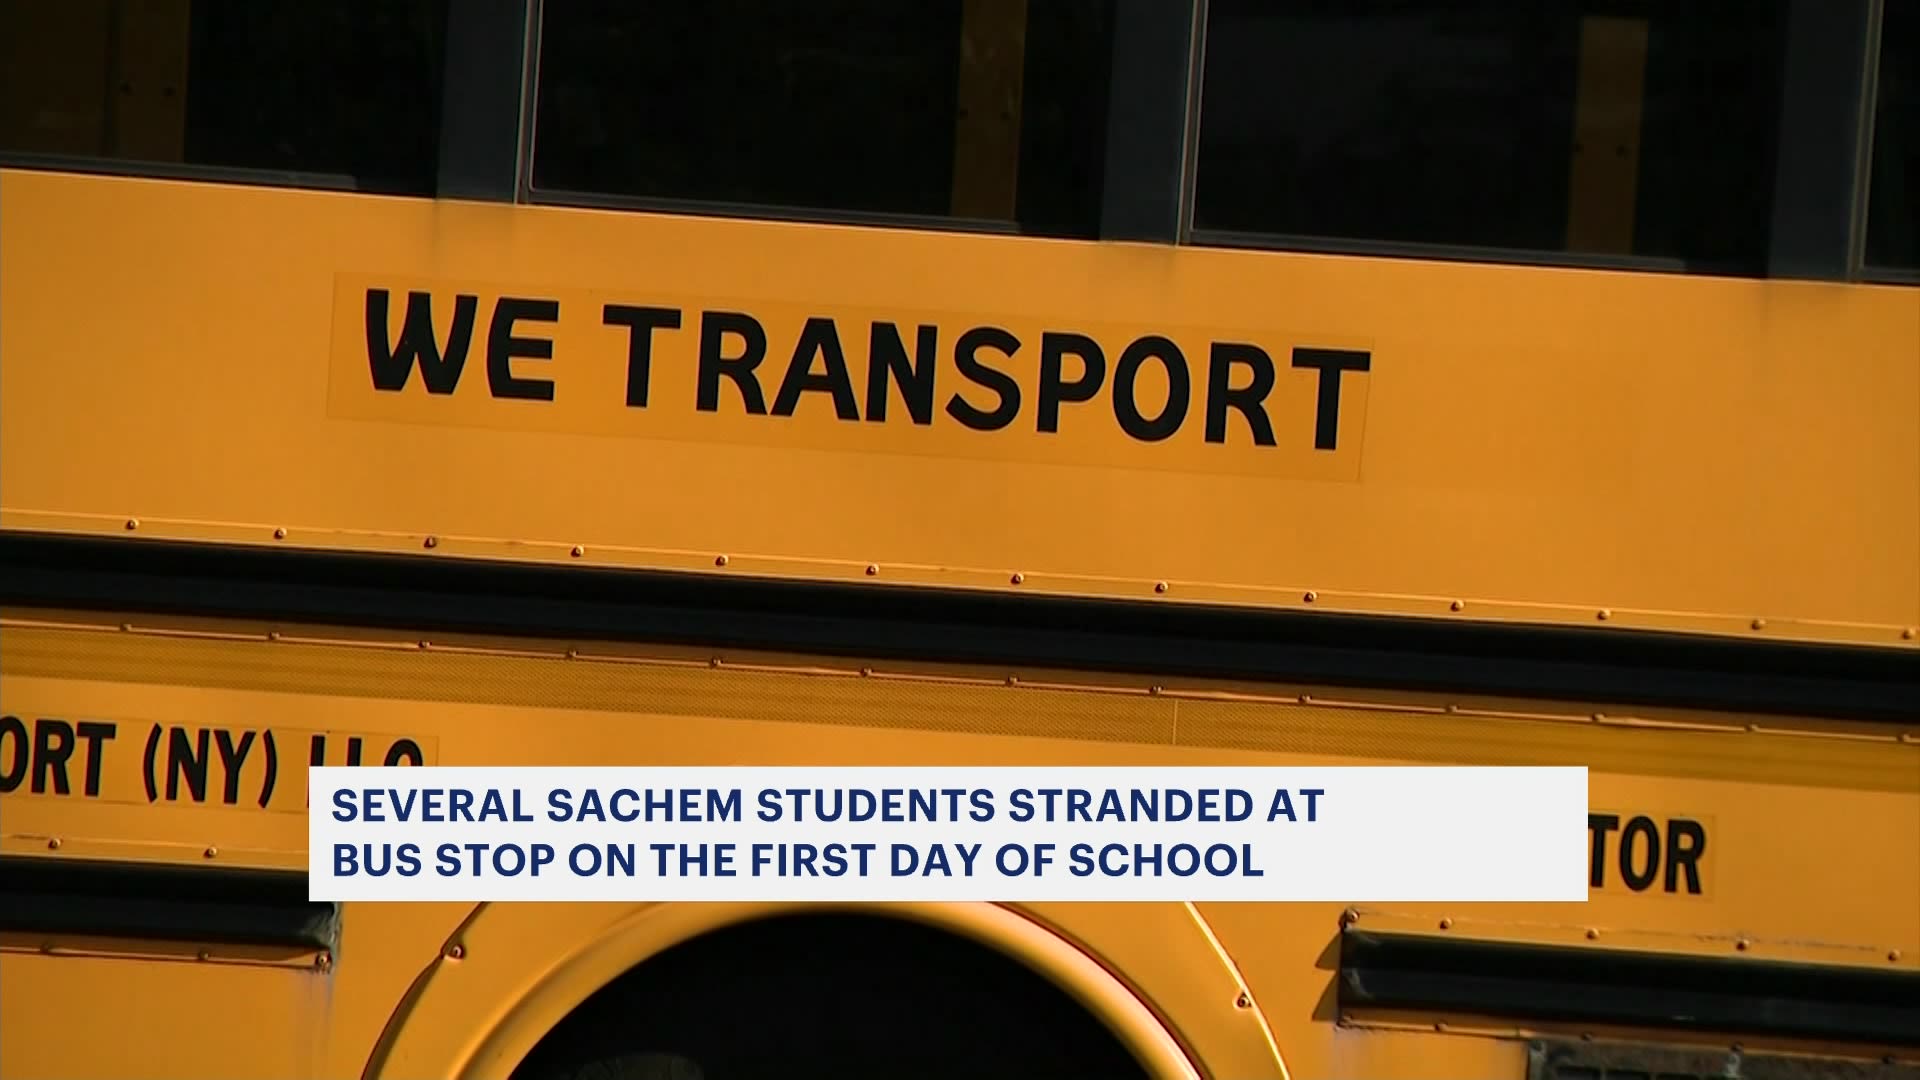 Sachem students stranded on first day of school amid bus troubles